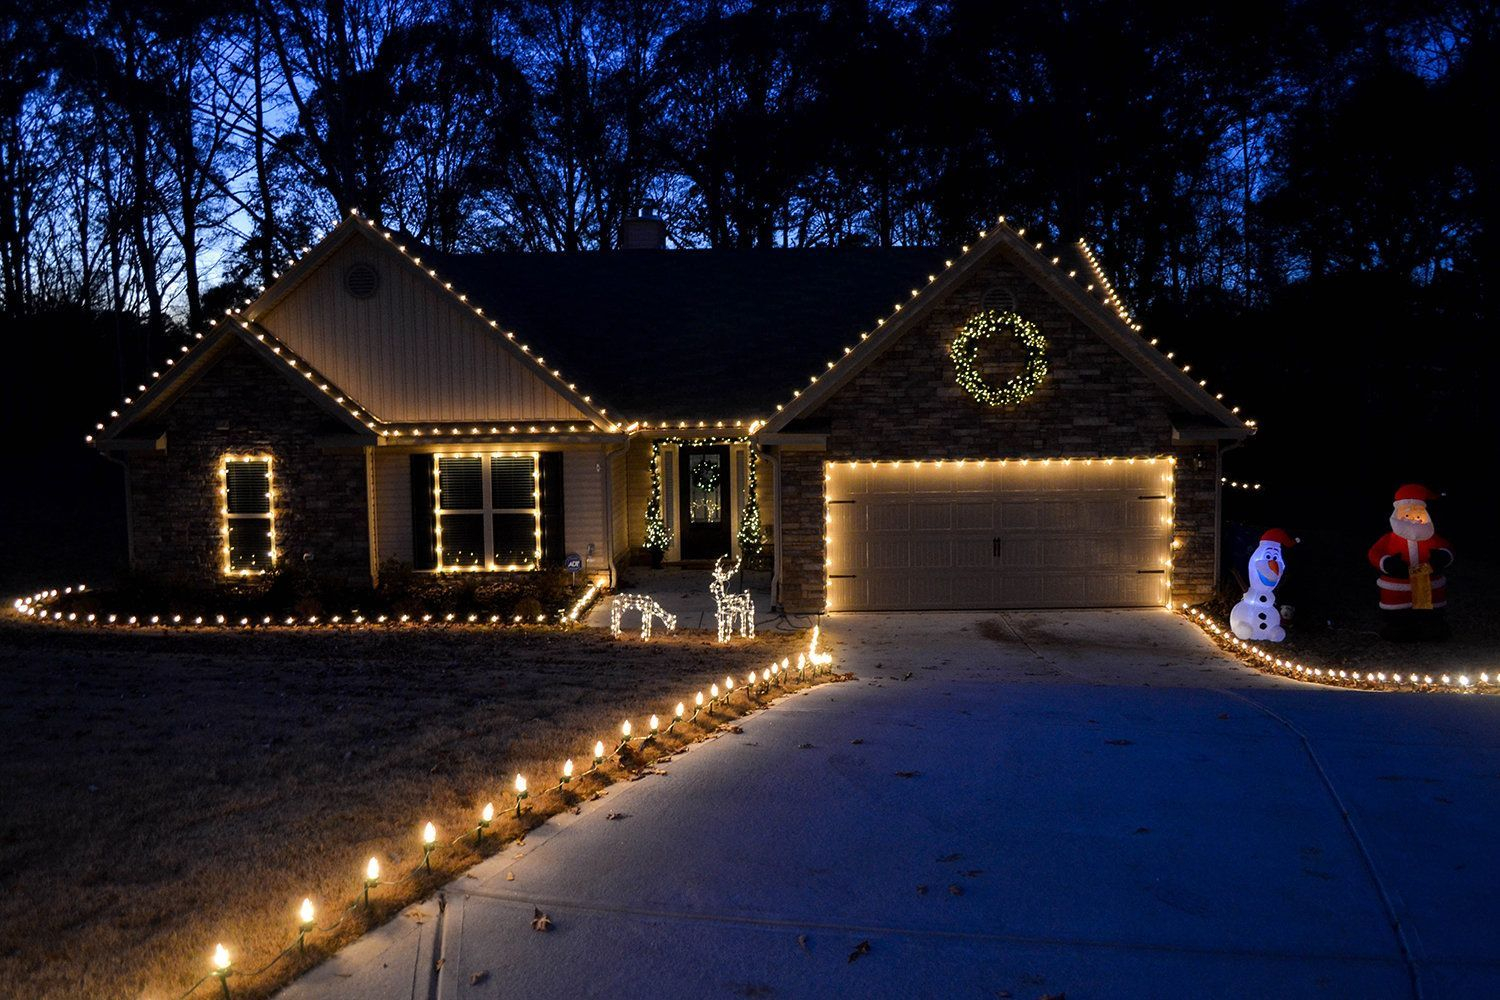 Hang Christmas Lights Across The Roof And Down The Driveway intended for size 1500 X 1000